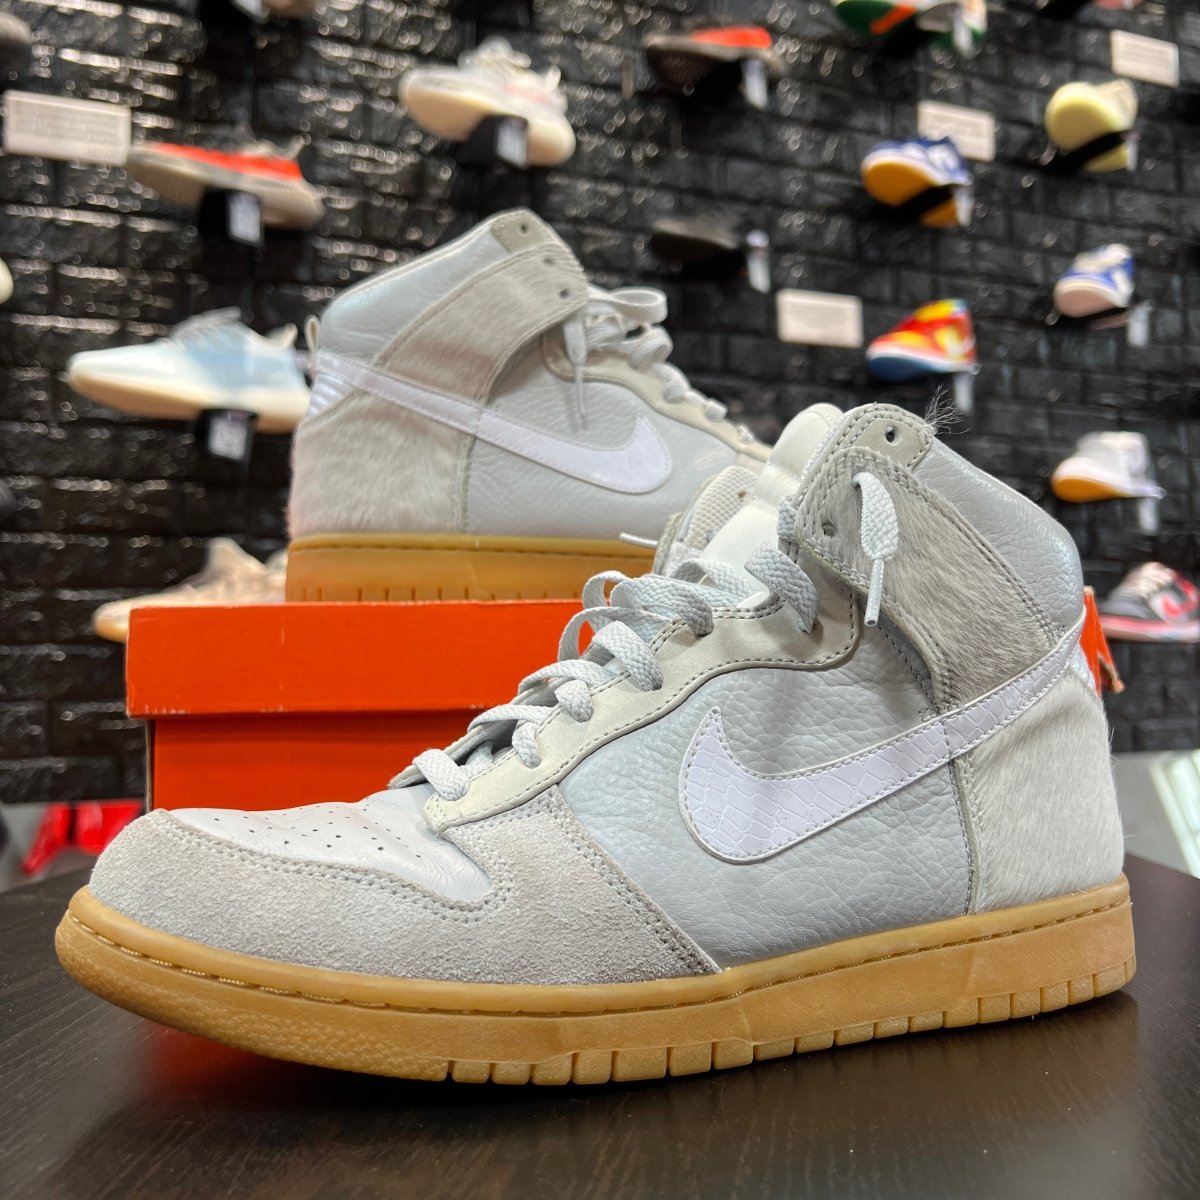 Dunk High Premium Neutral Grey White - Gently Enjoyed (Used) - Men 10.5 - High Sneaker - Jawns on Fire Sneakers & Streetwear